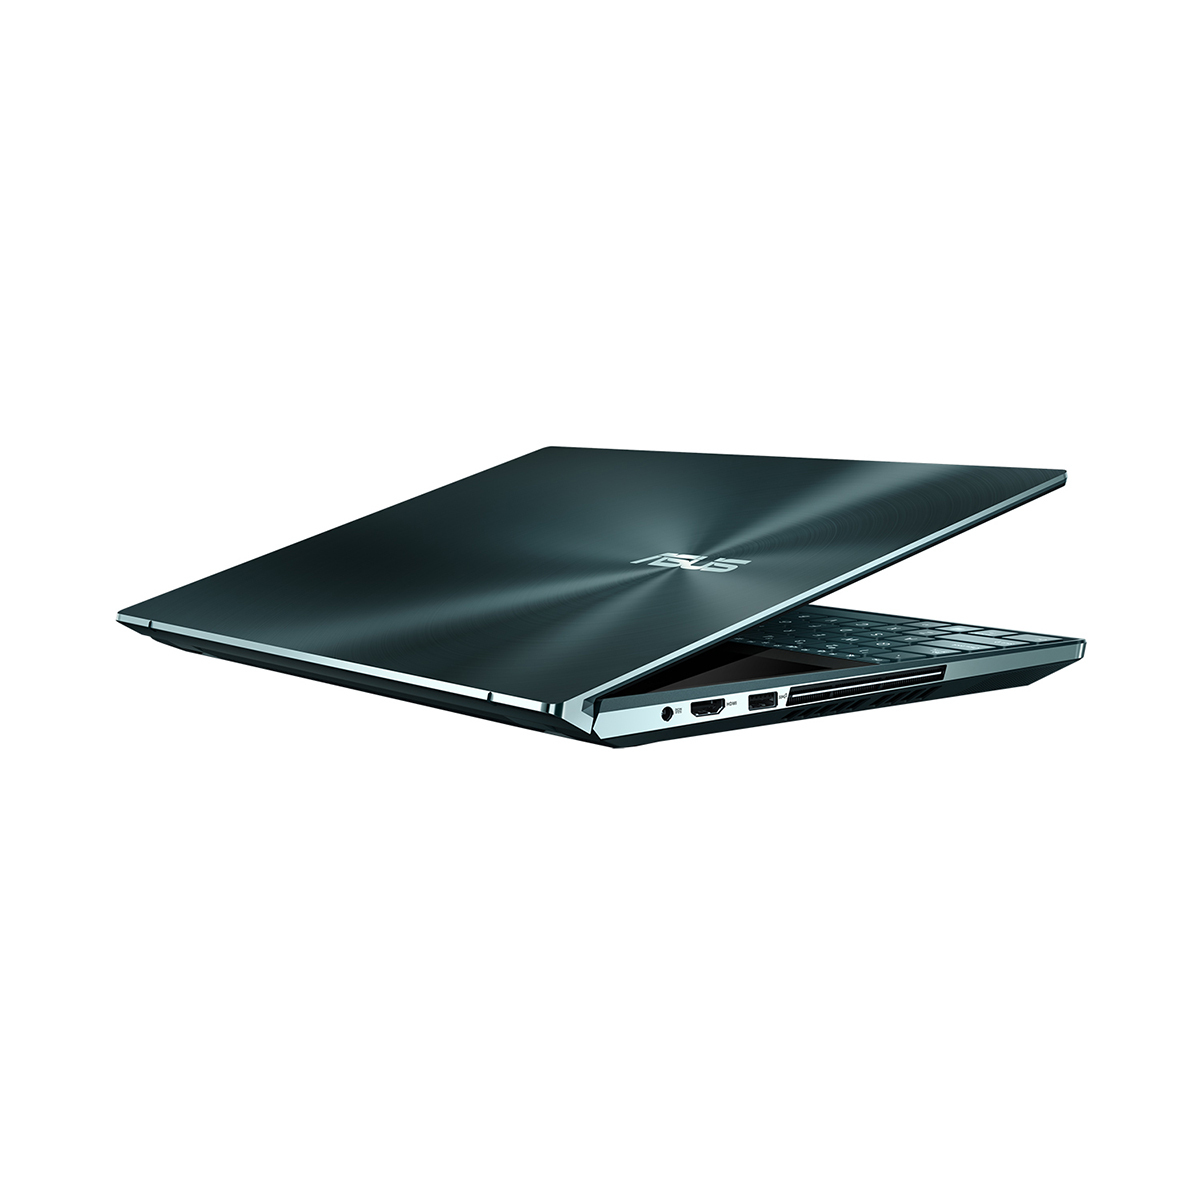 Buy ASUS ZenBook Pro Duo, Intel Core i9, 32GB RAM, 1TB SSD, NVIDIA GeForce RTX 2060, 15.6  Inch OLED Laptop, UX581LV-H2024T at costco.co.uk